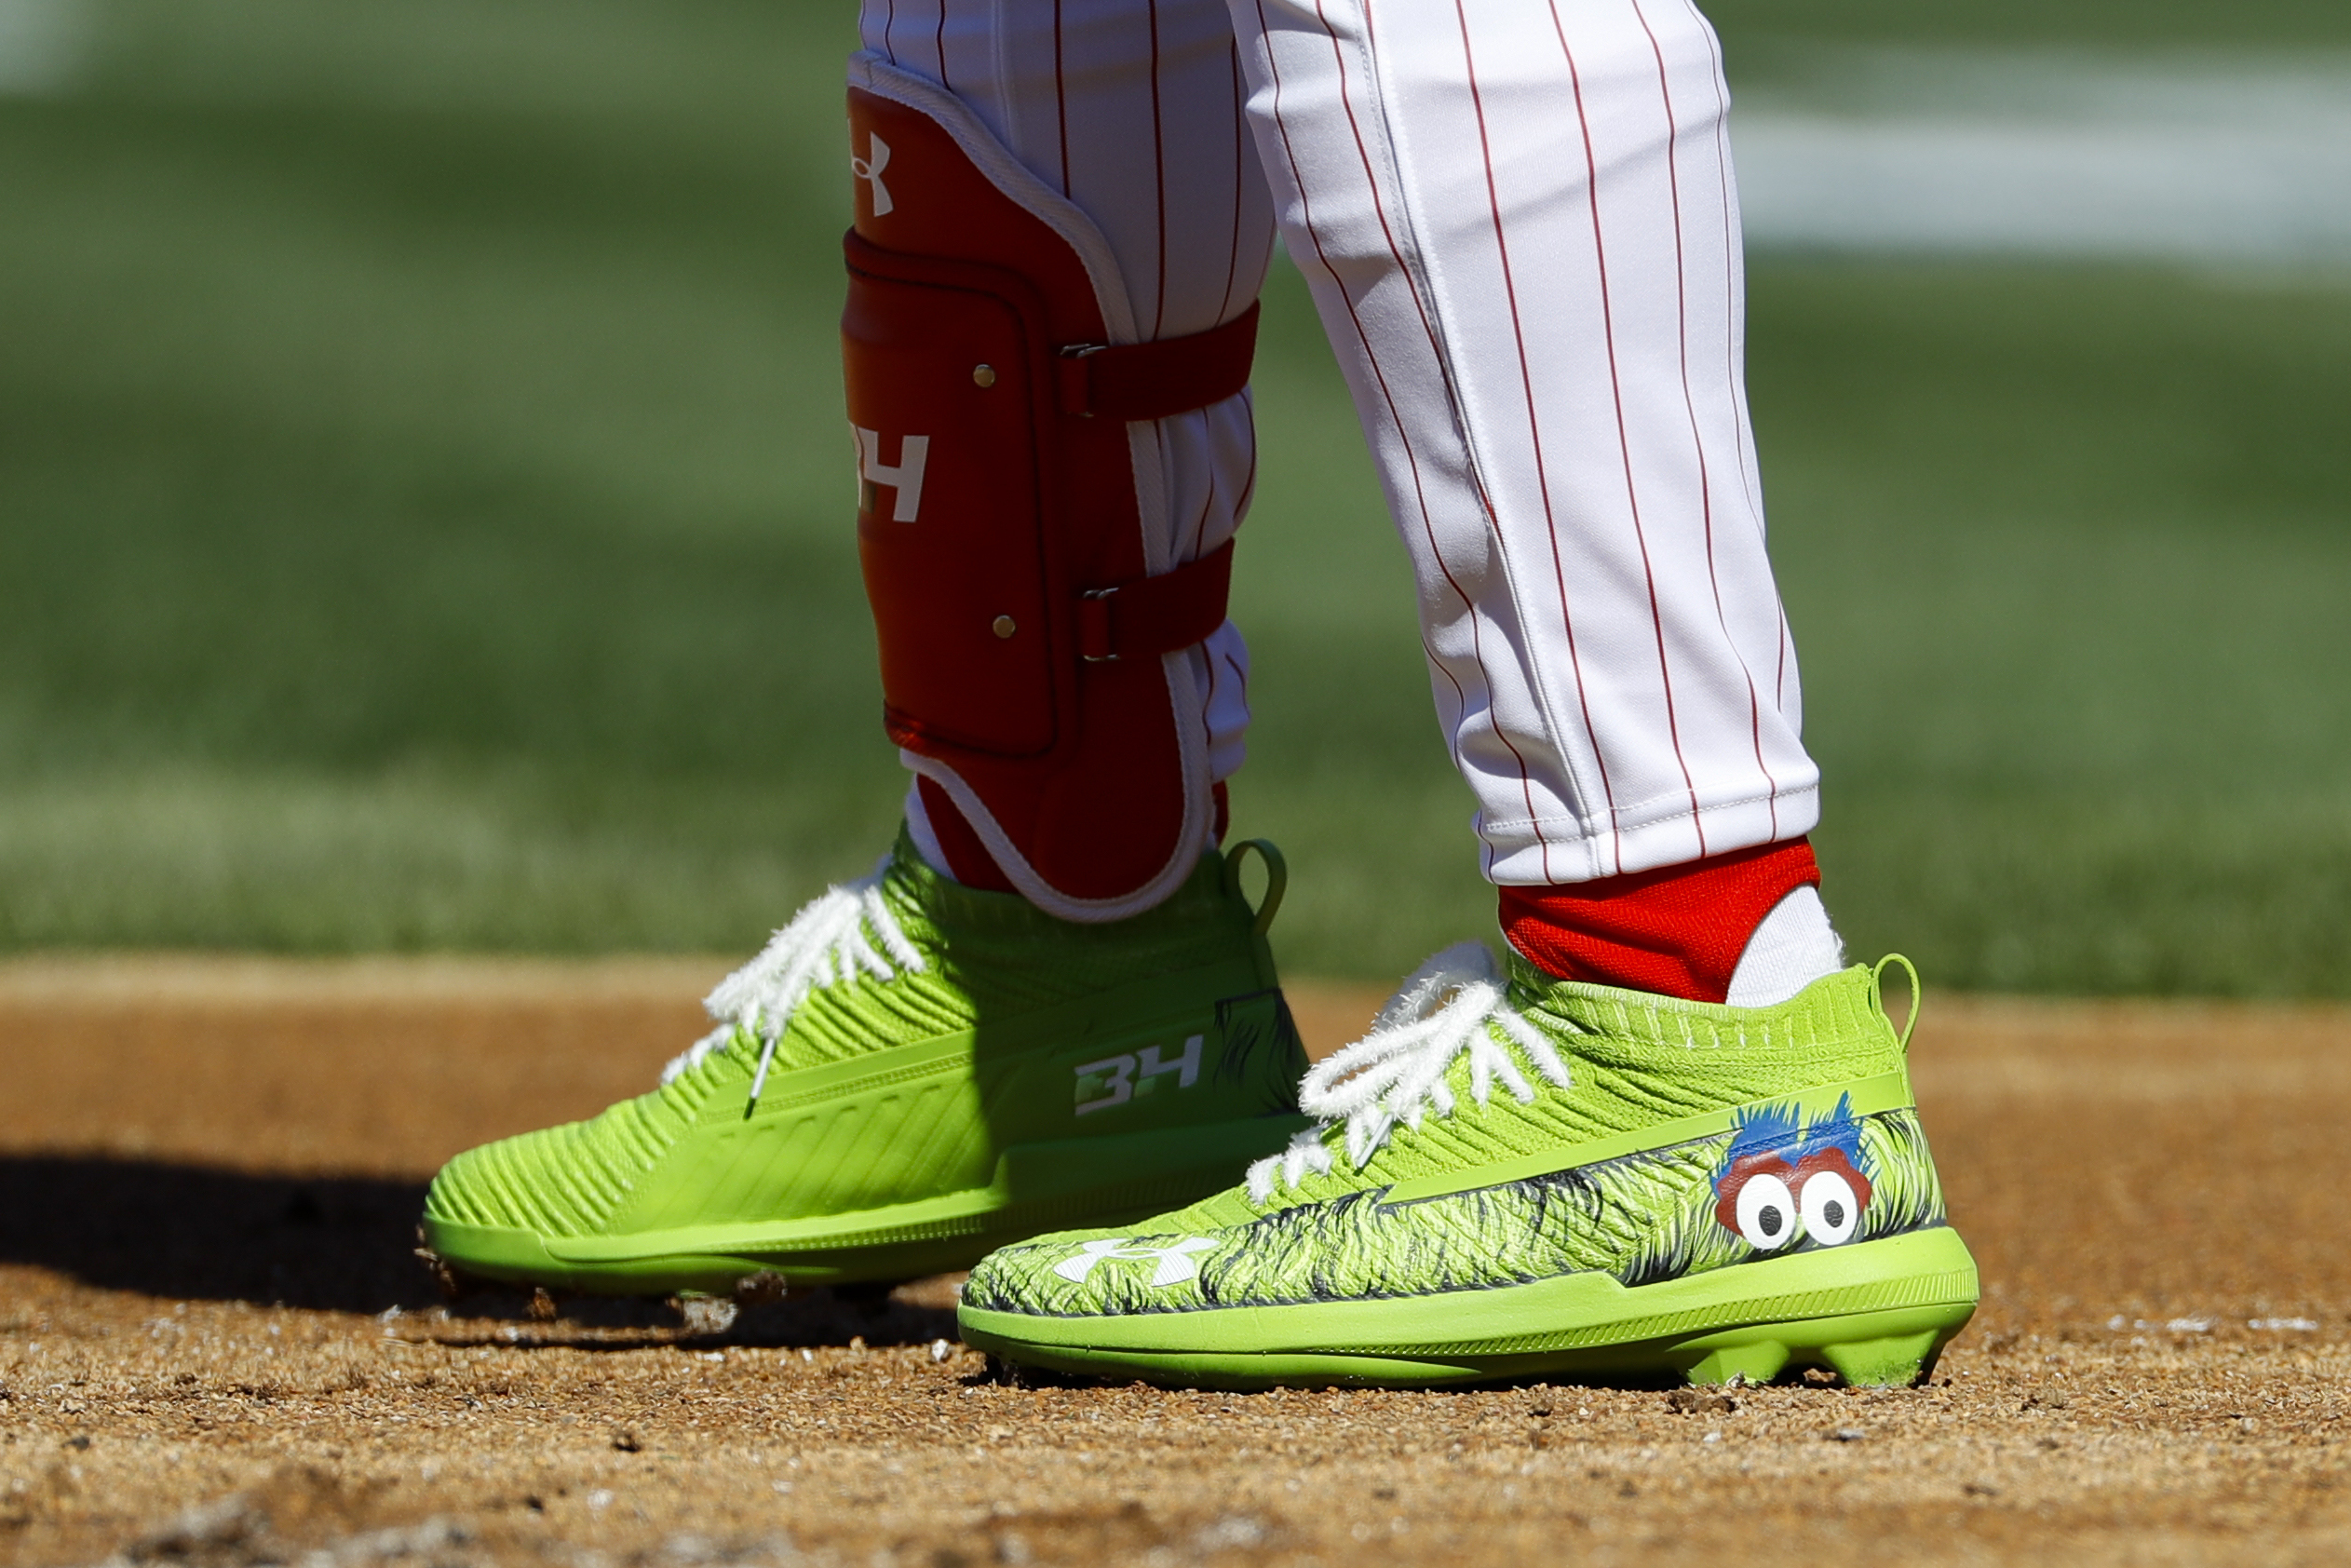 Bryce Harper's Phillies debut includes 